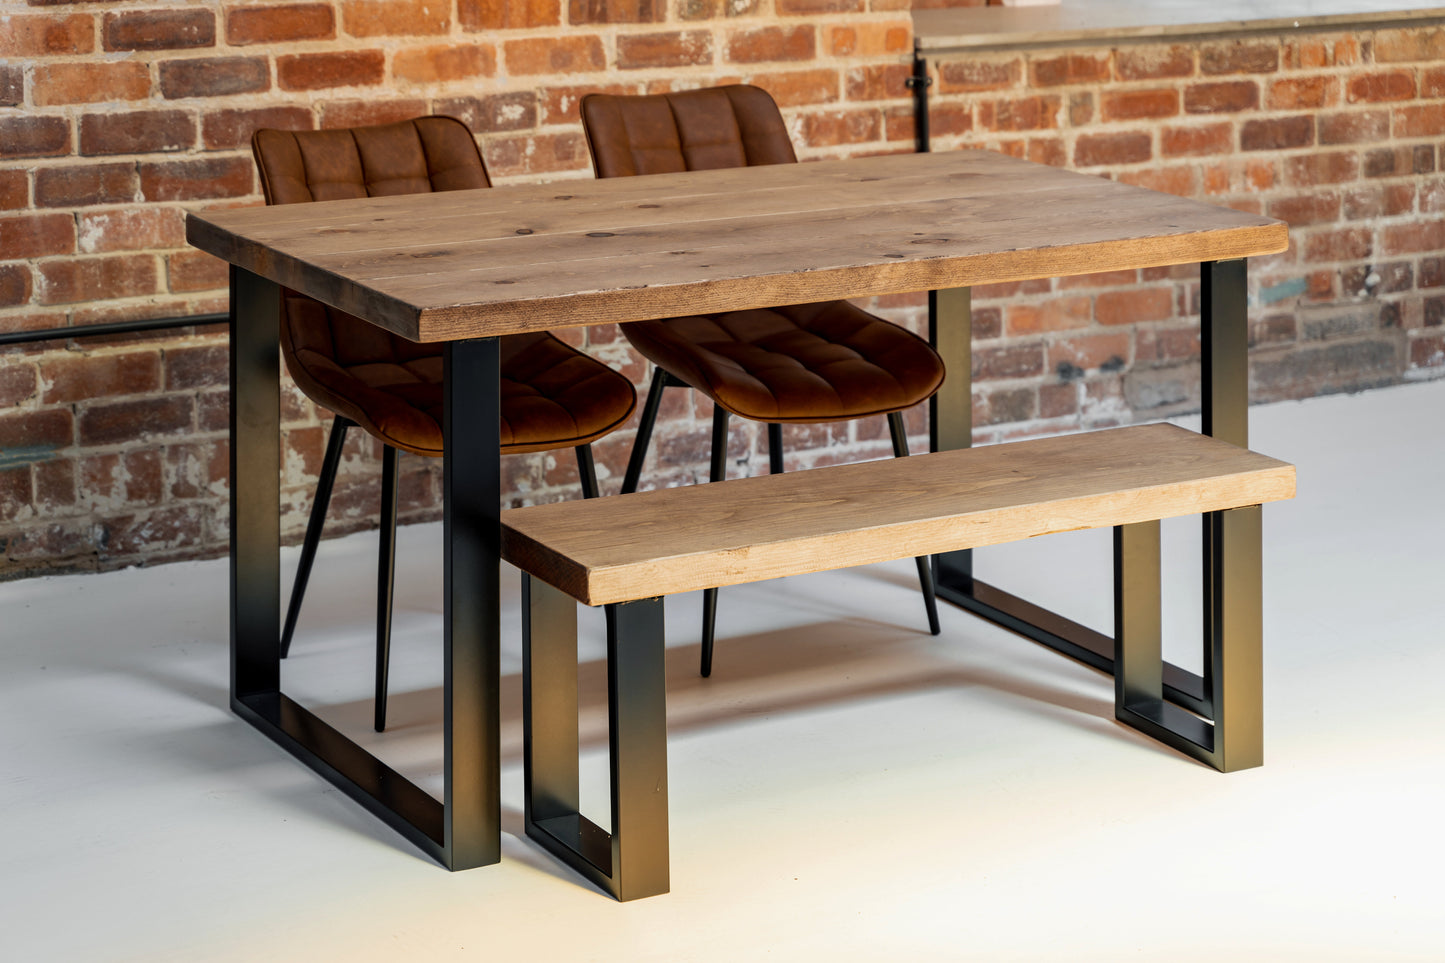 Square Leg Dining Table Bench | Rustic Shoe Bench